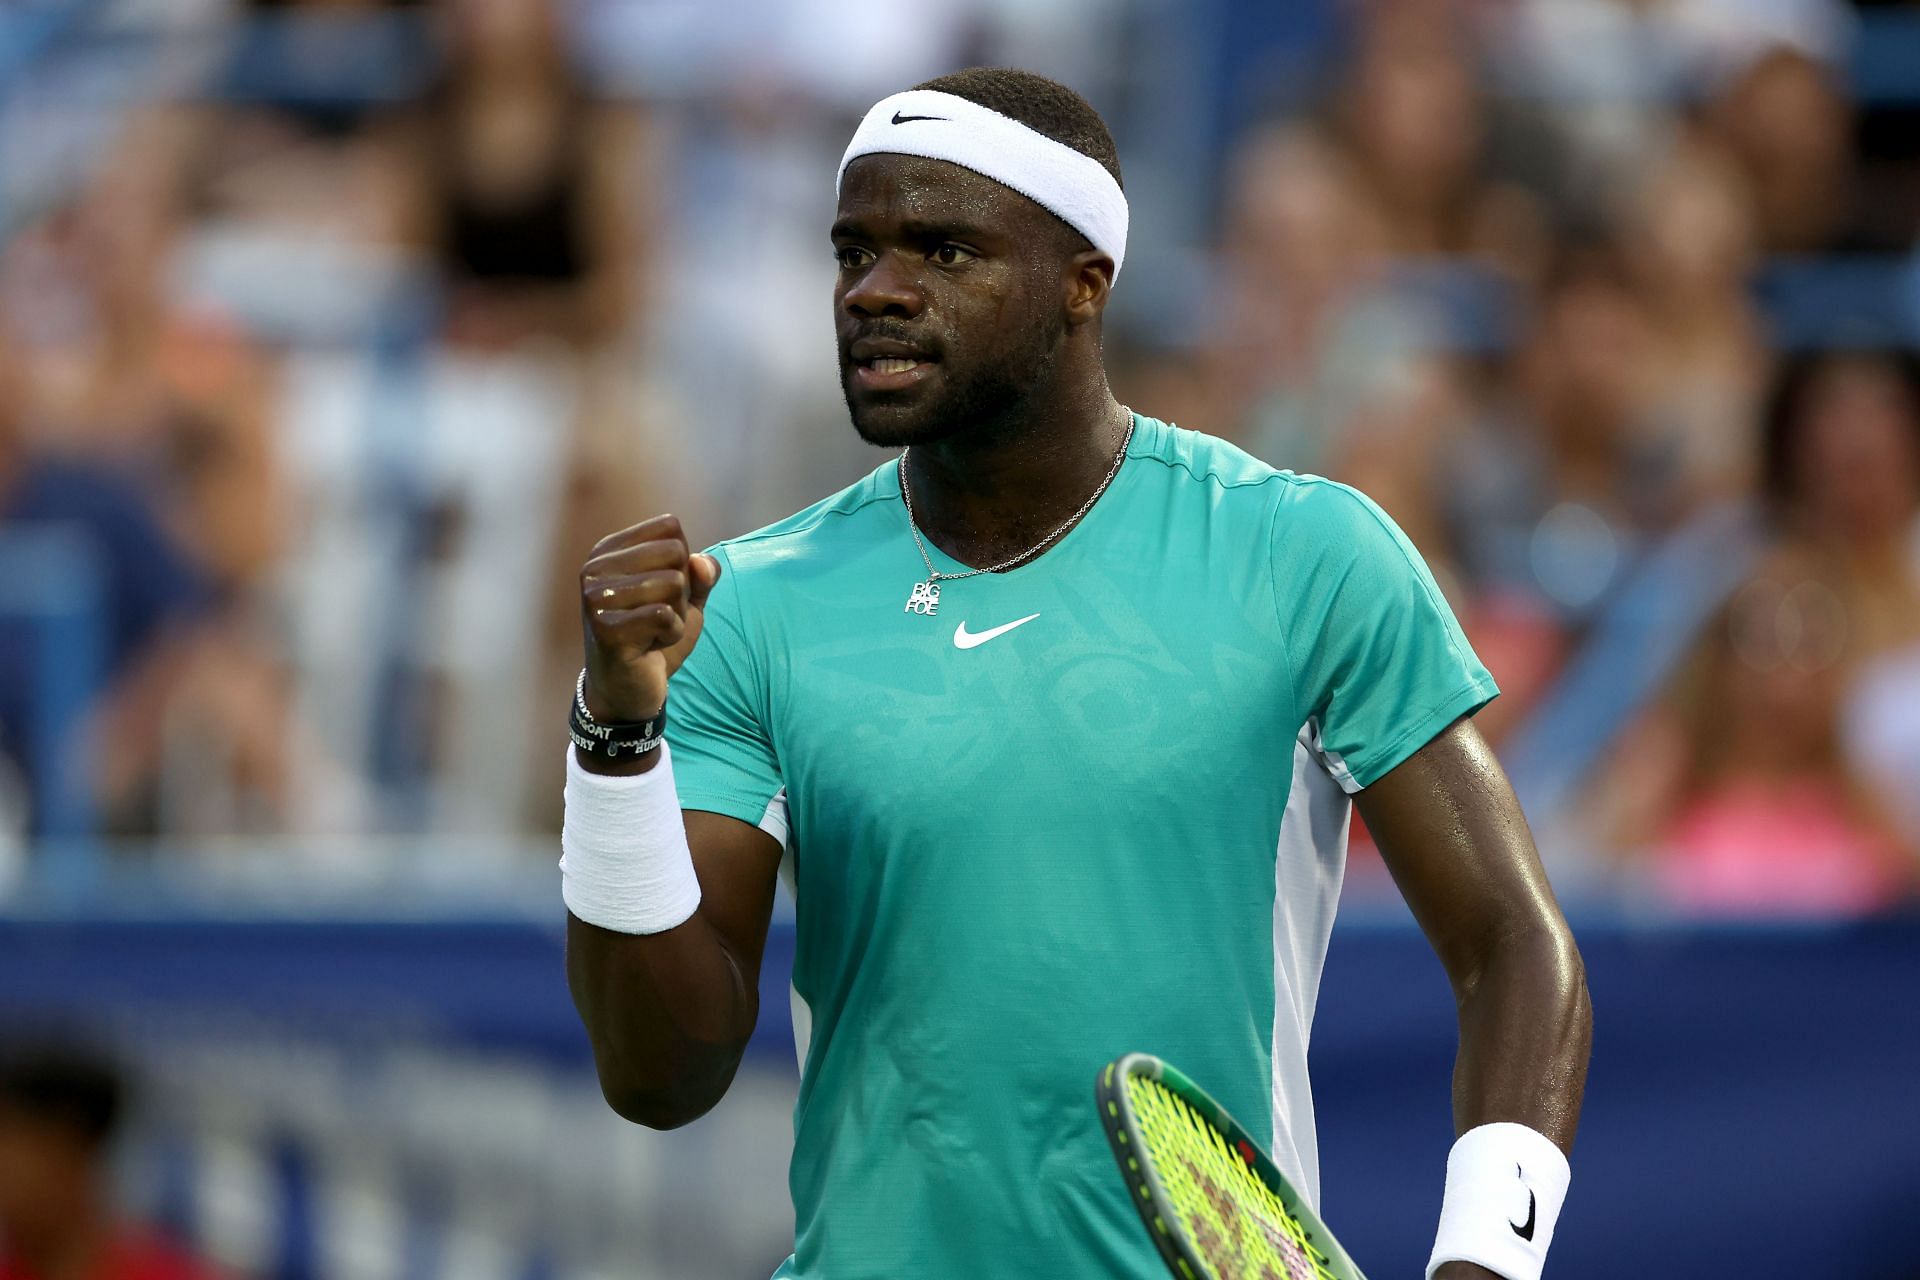 "Frances Tiafoe is just bringing that energy" Kevin Durant lauds